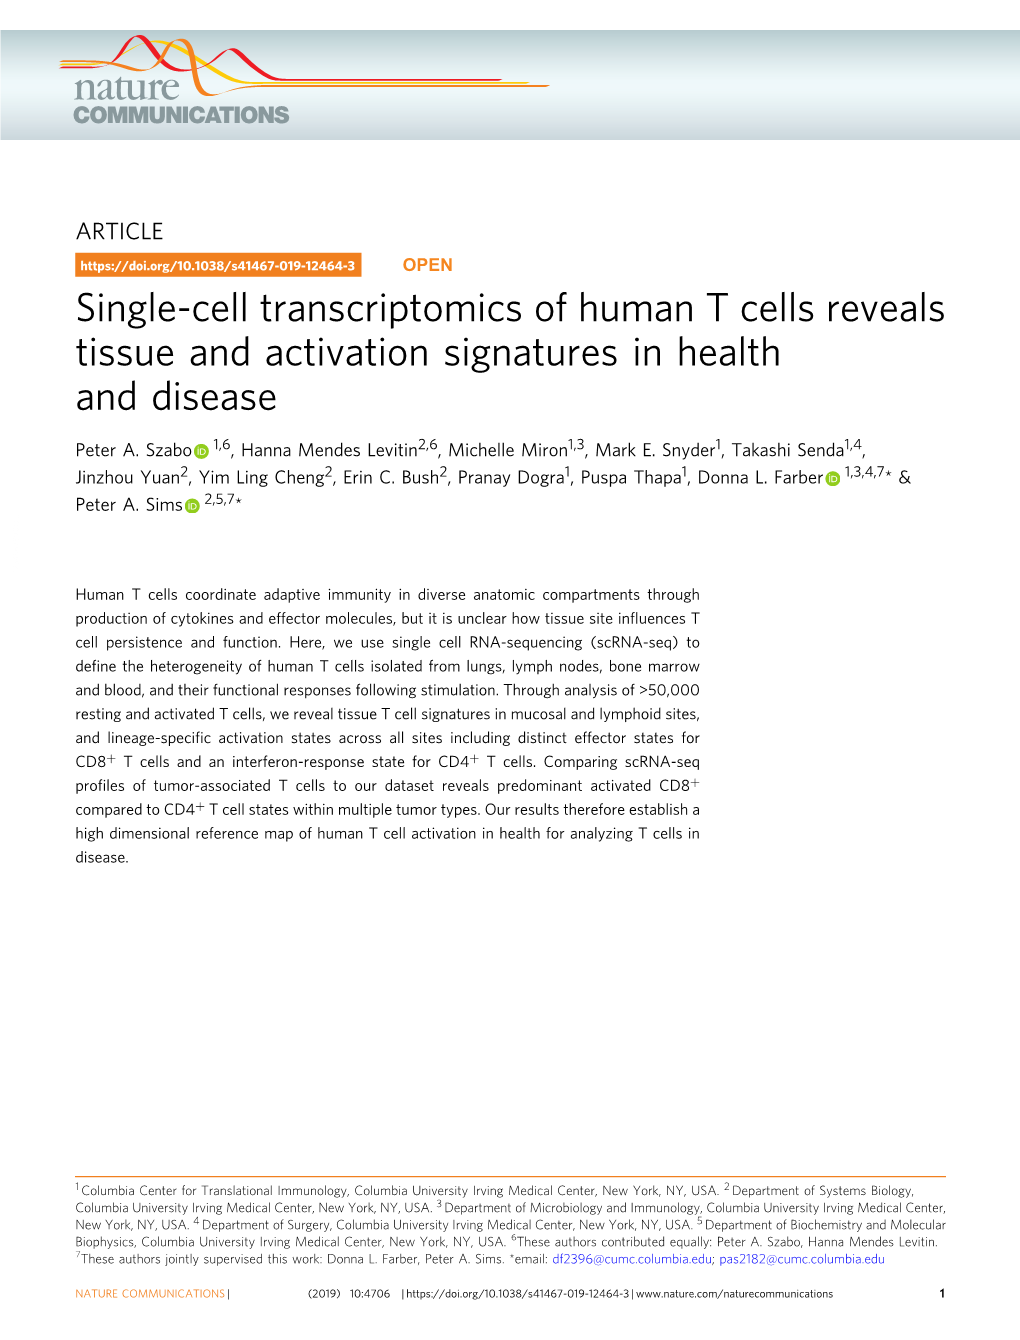 Single-Cell Transcriptomics of Human T Cells Reveals Tissue and Activation Signatures in Health and Disease